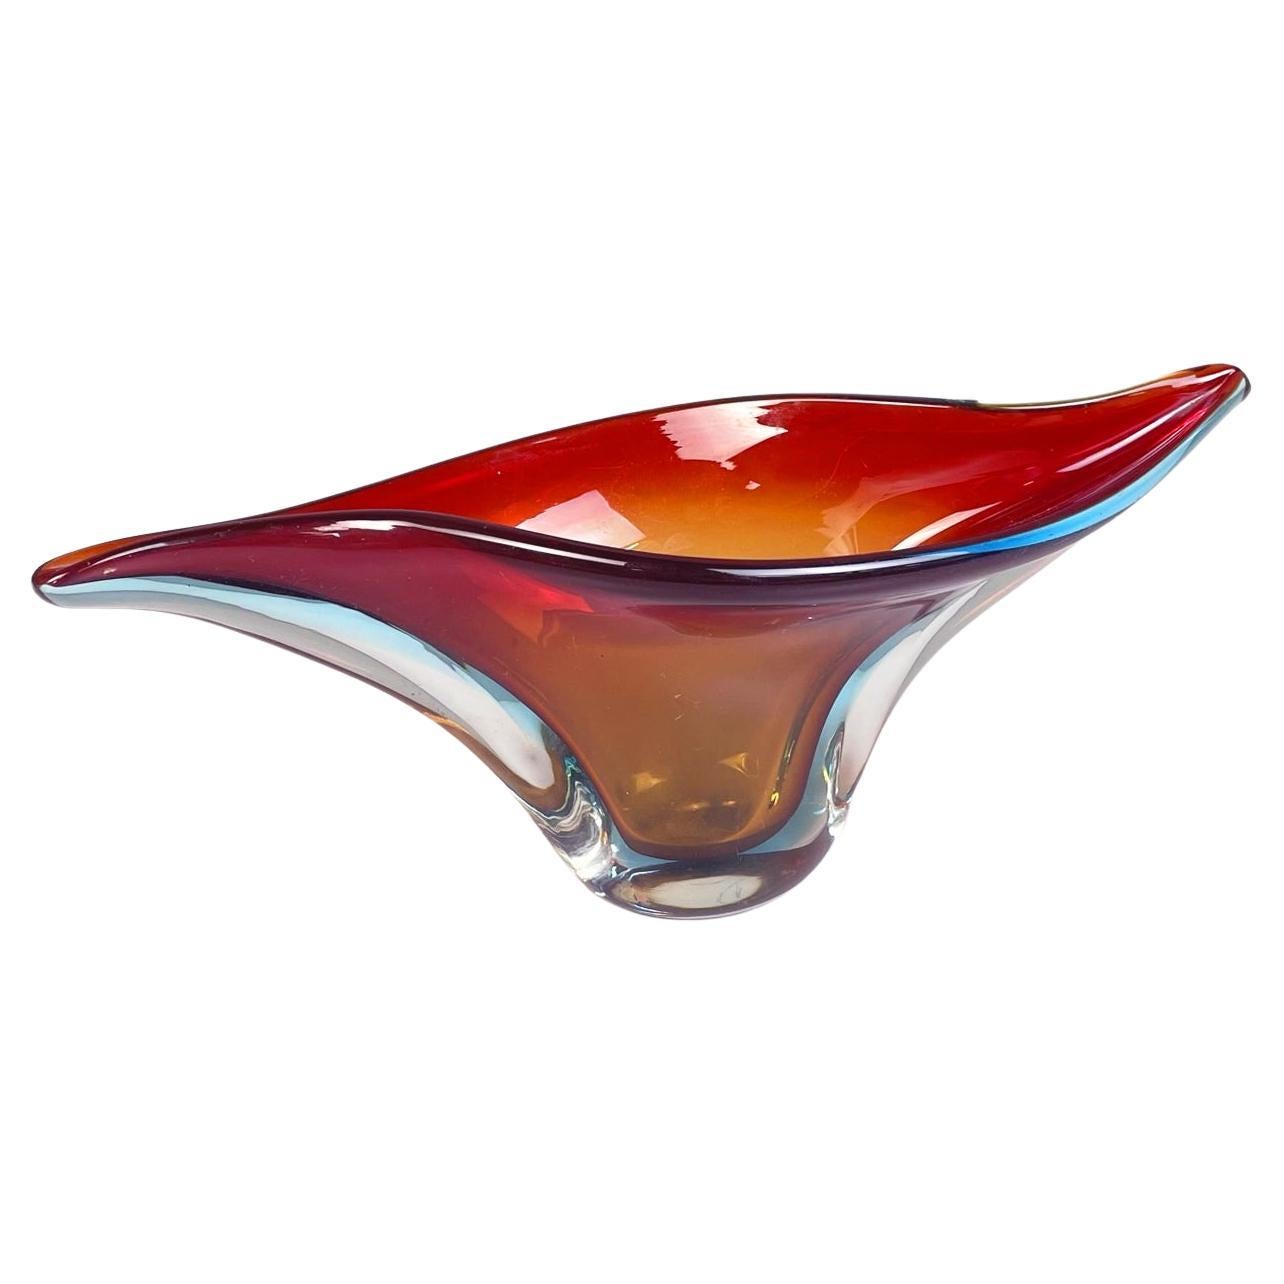 Italian Midcentury Centerpiece in Yellow, Red and Blue Murano Glass, 1960s For Sale